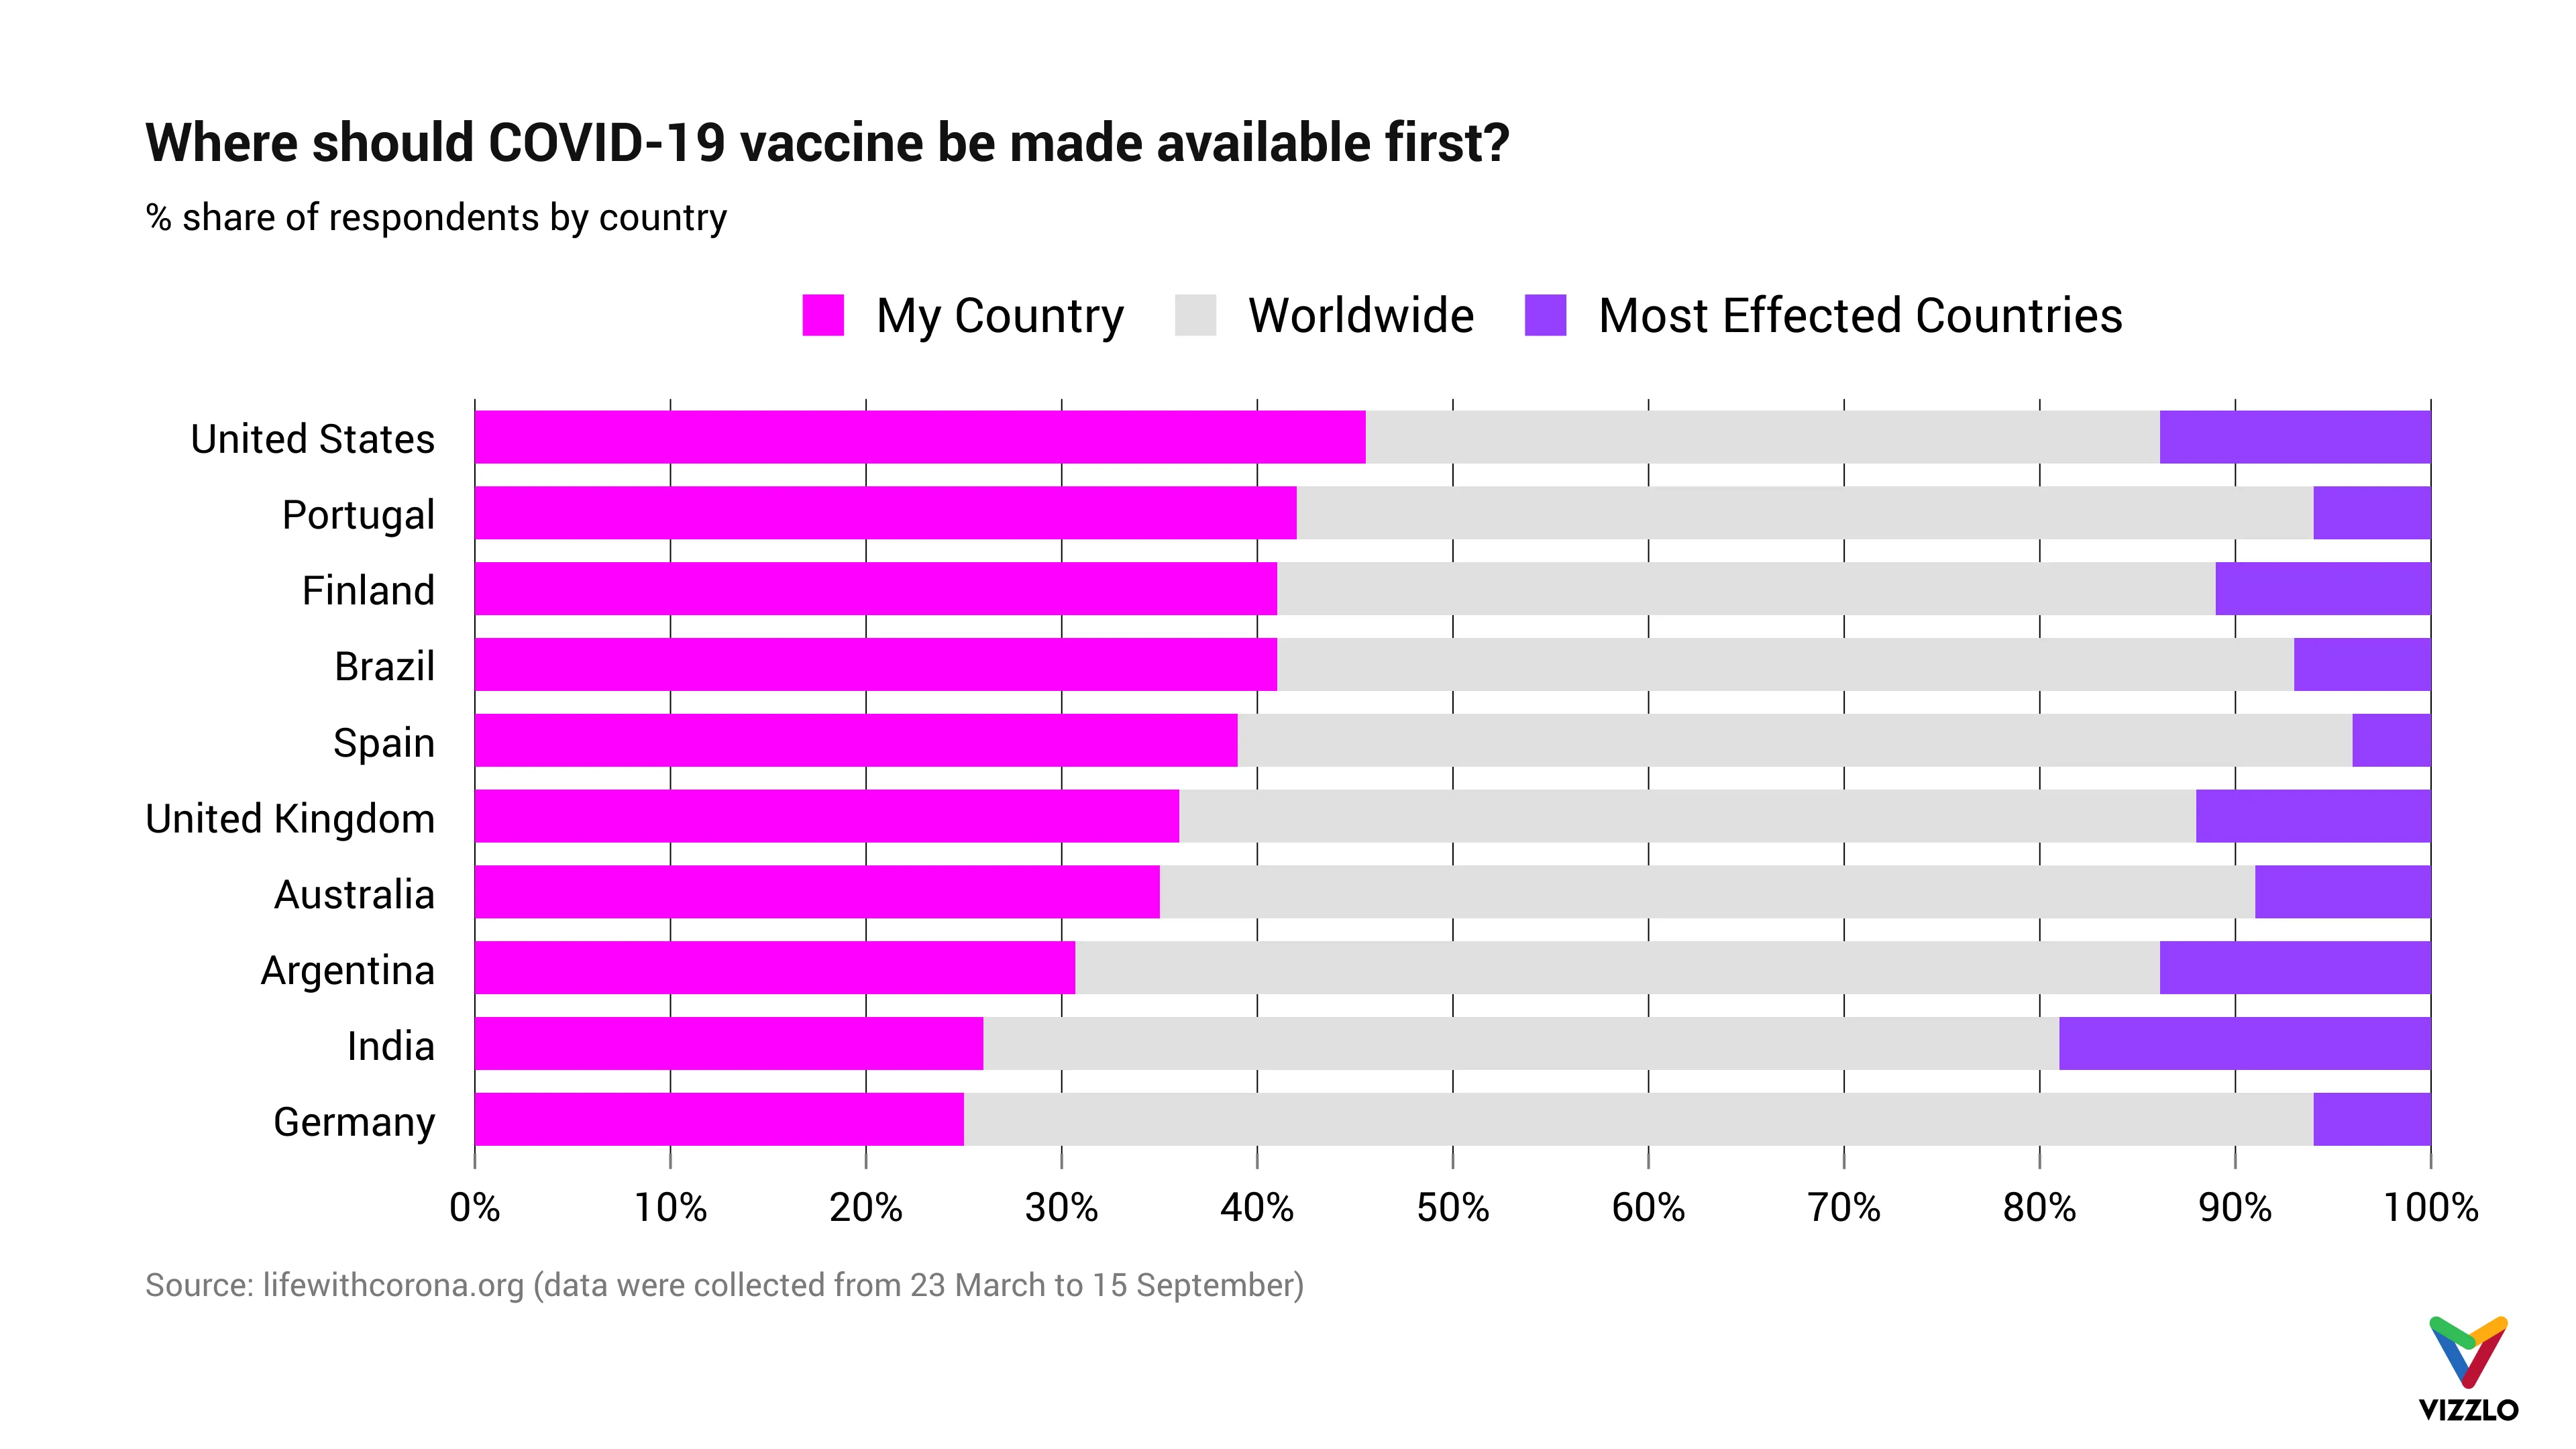 Where should COVID-19 vaccine be made available first?